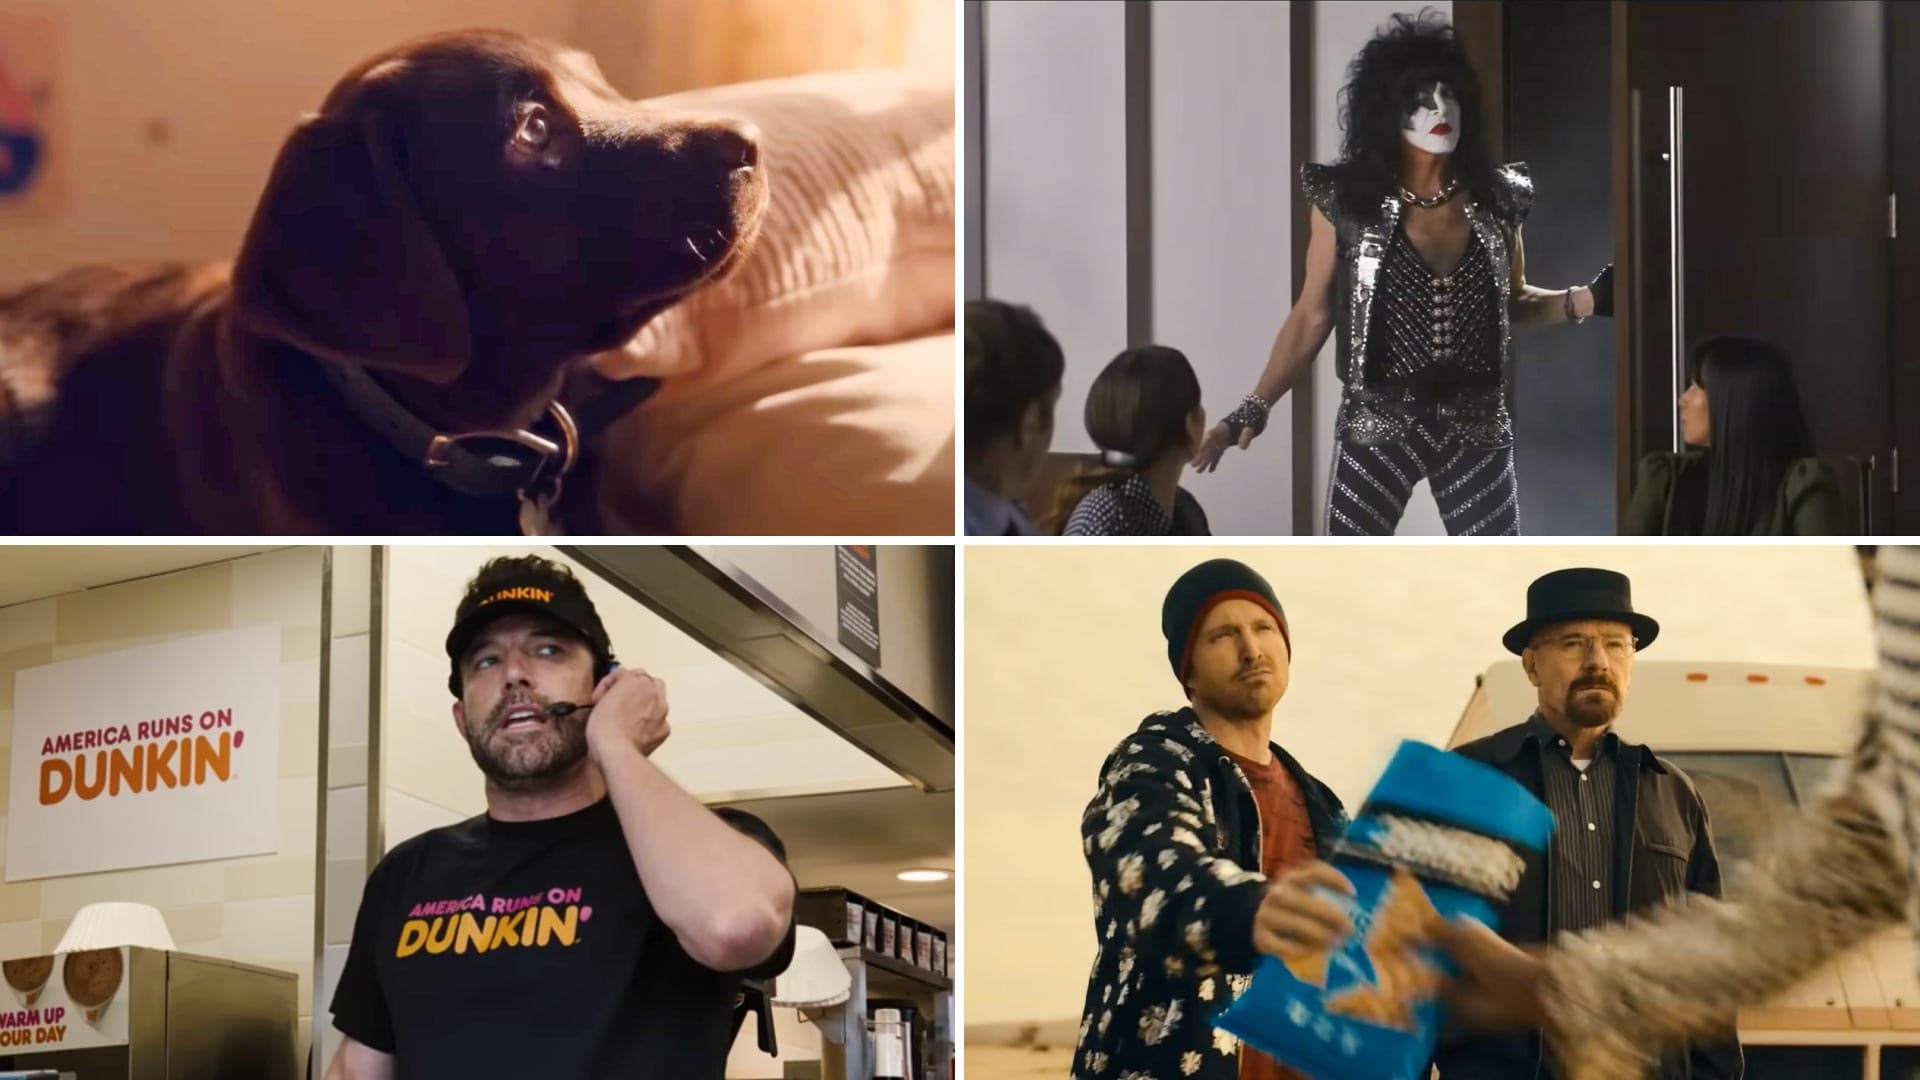 Collage of puppy, Paul Stanley, Ben Affleck working at Dunkin', and Jesse Pinkman and Walter White from "Breaking Bad"